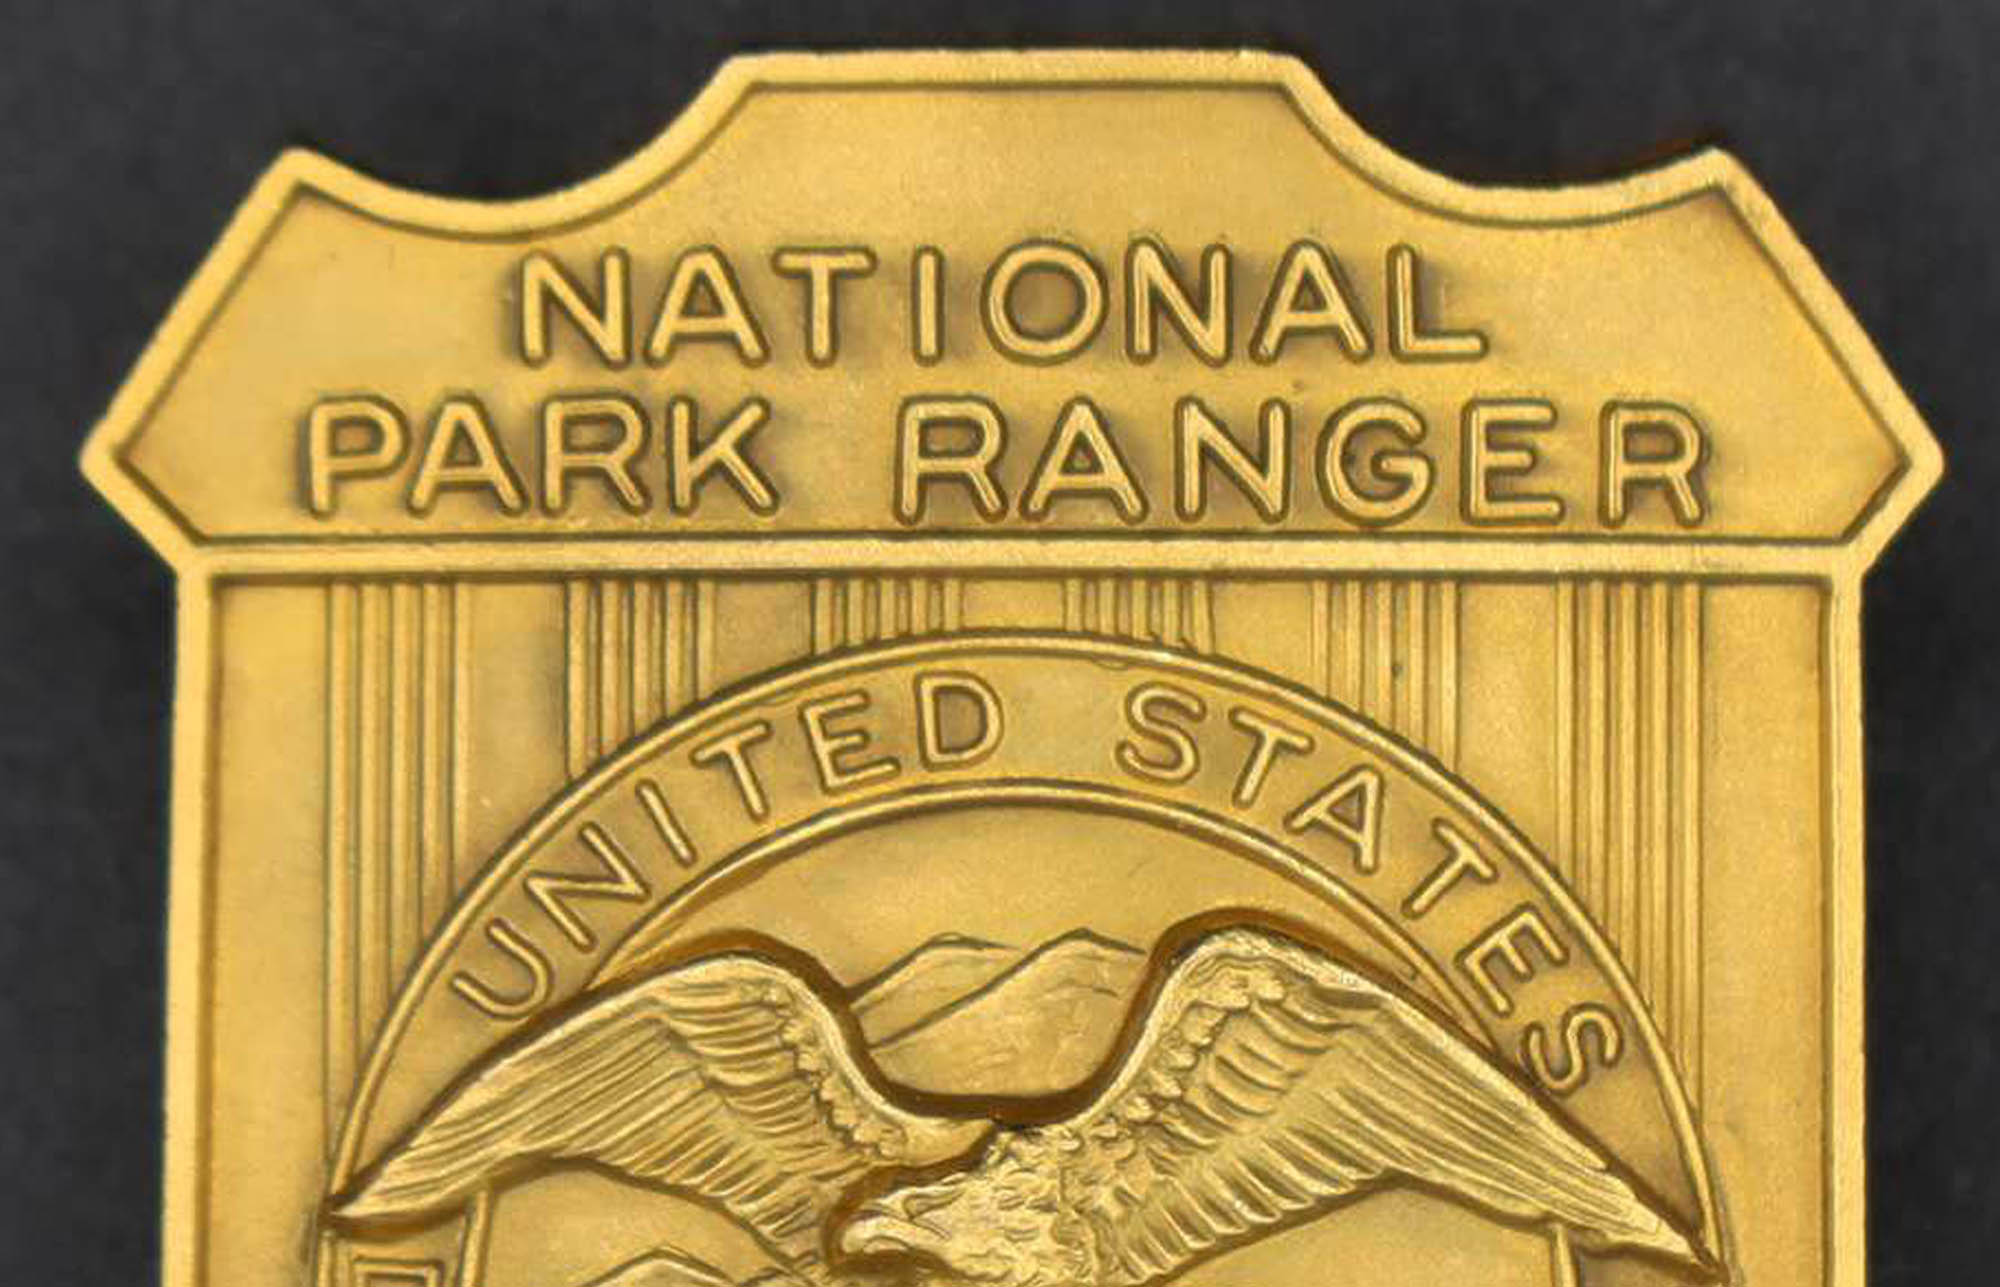 Gold shield-shaped badge marked National Park Ranger. The round seal in the middle has an eagle looking to its right.e